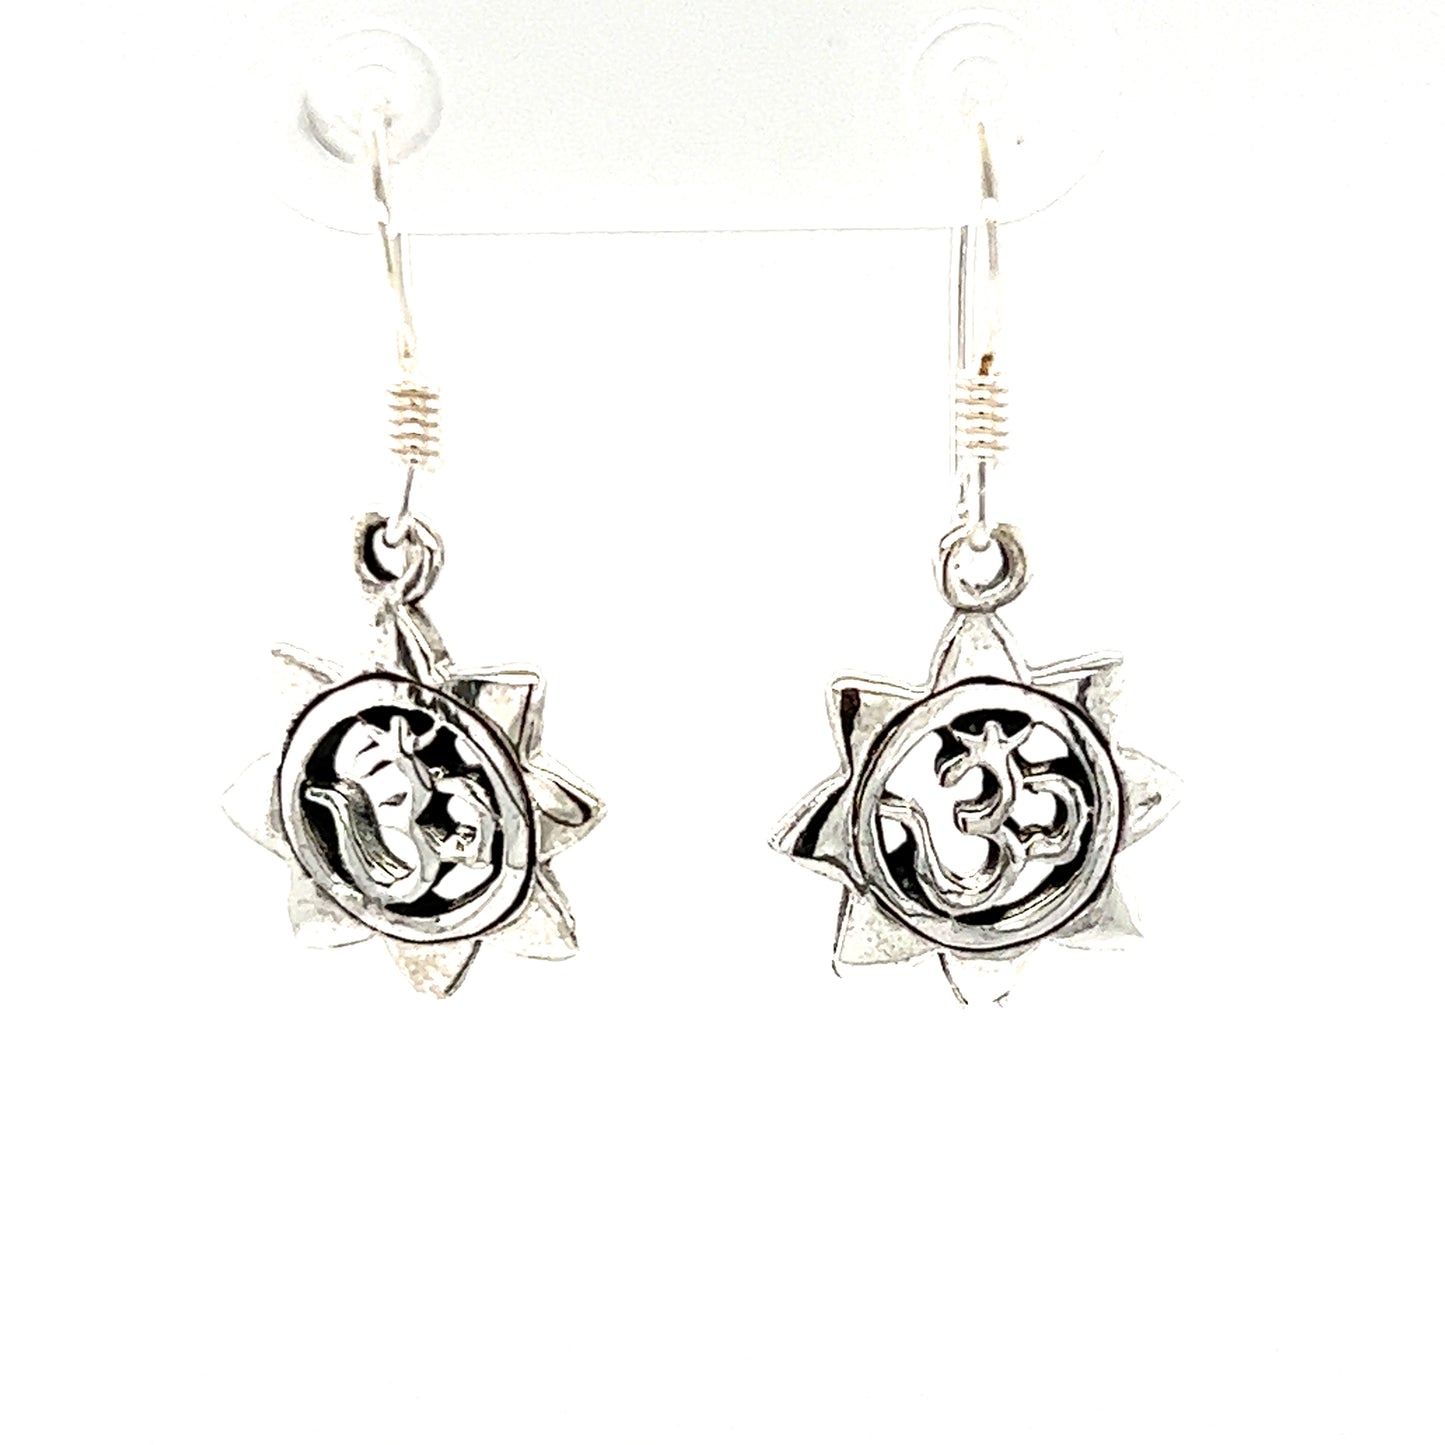 A pair of Super Silver Om With Sun Earrings.